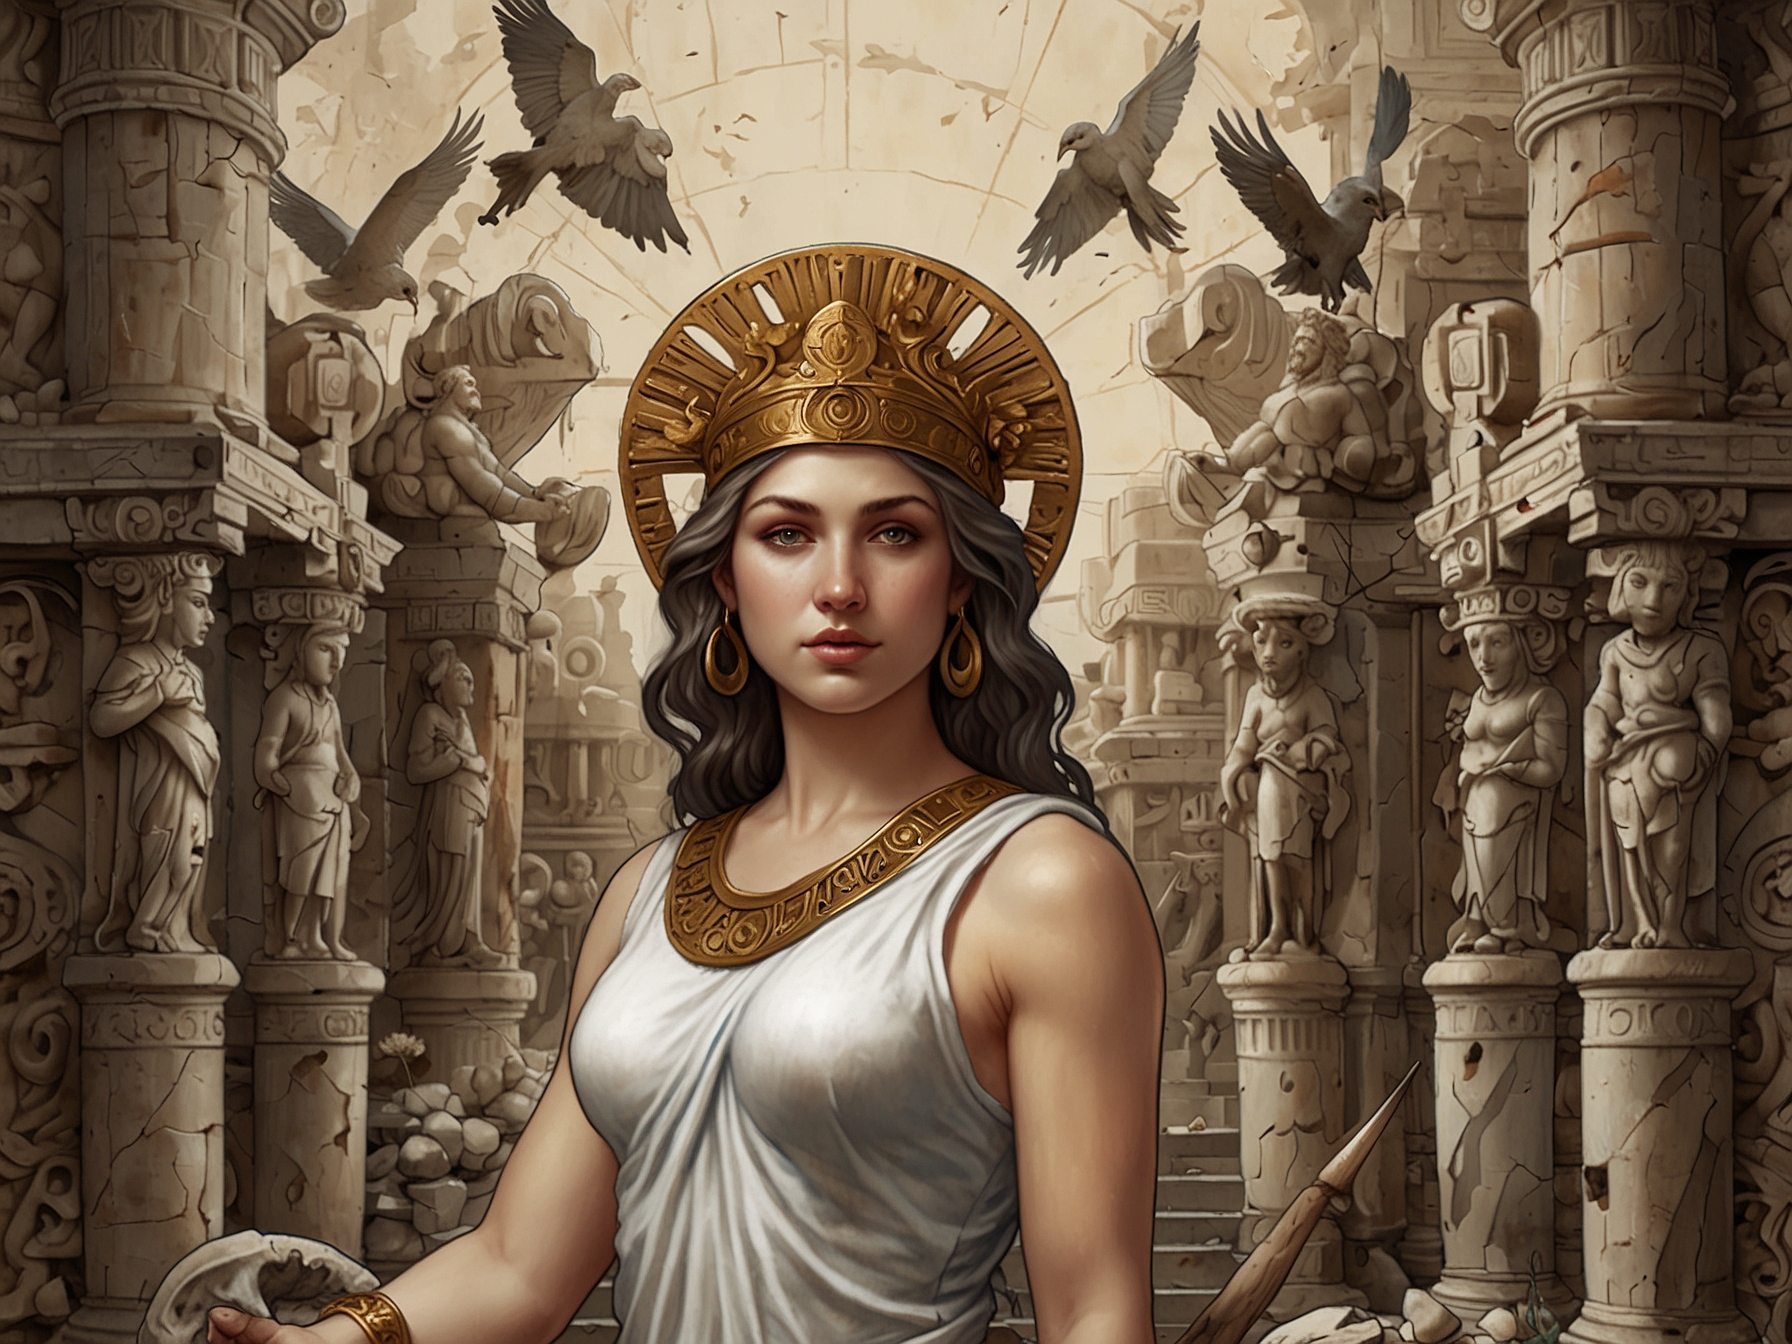 Illustration of a Greek god and goddess surrounded by ancient artifacts, symbolizing the enduring legacy and profound meanings of Greek baby names like Athena and Apollo.